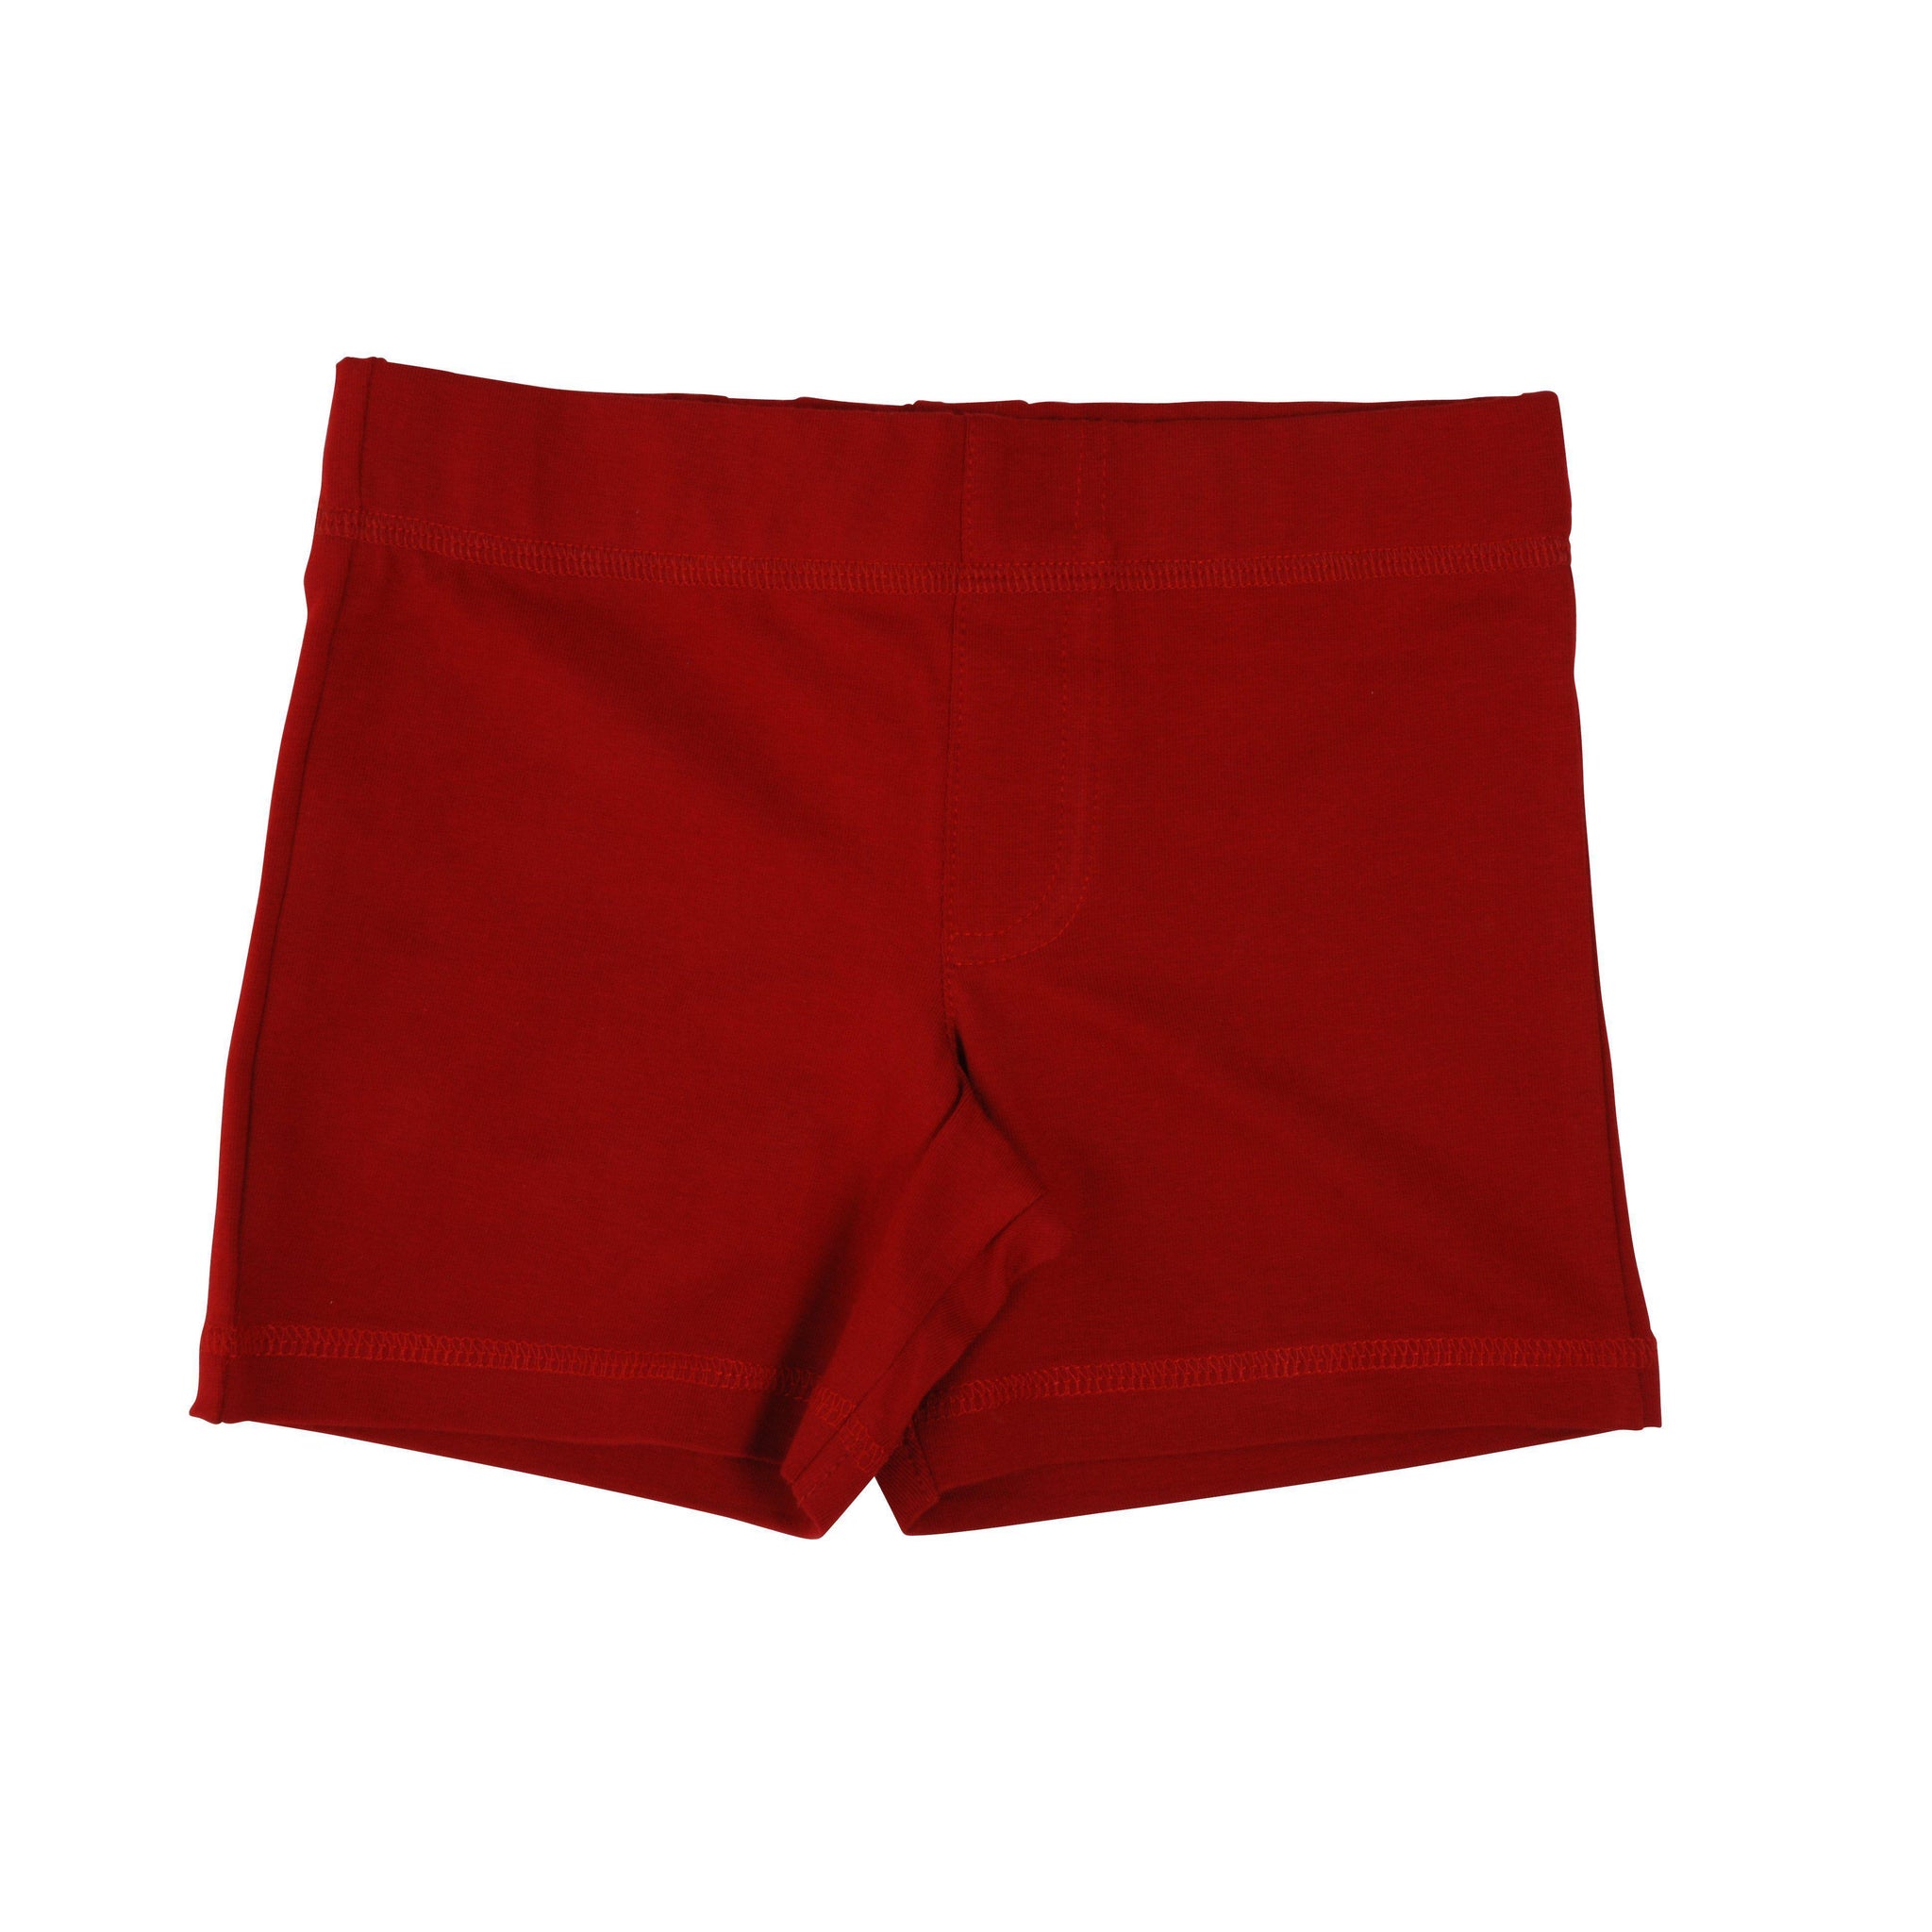 More than a Fling - Pompeian Red Shorts